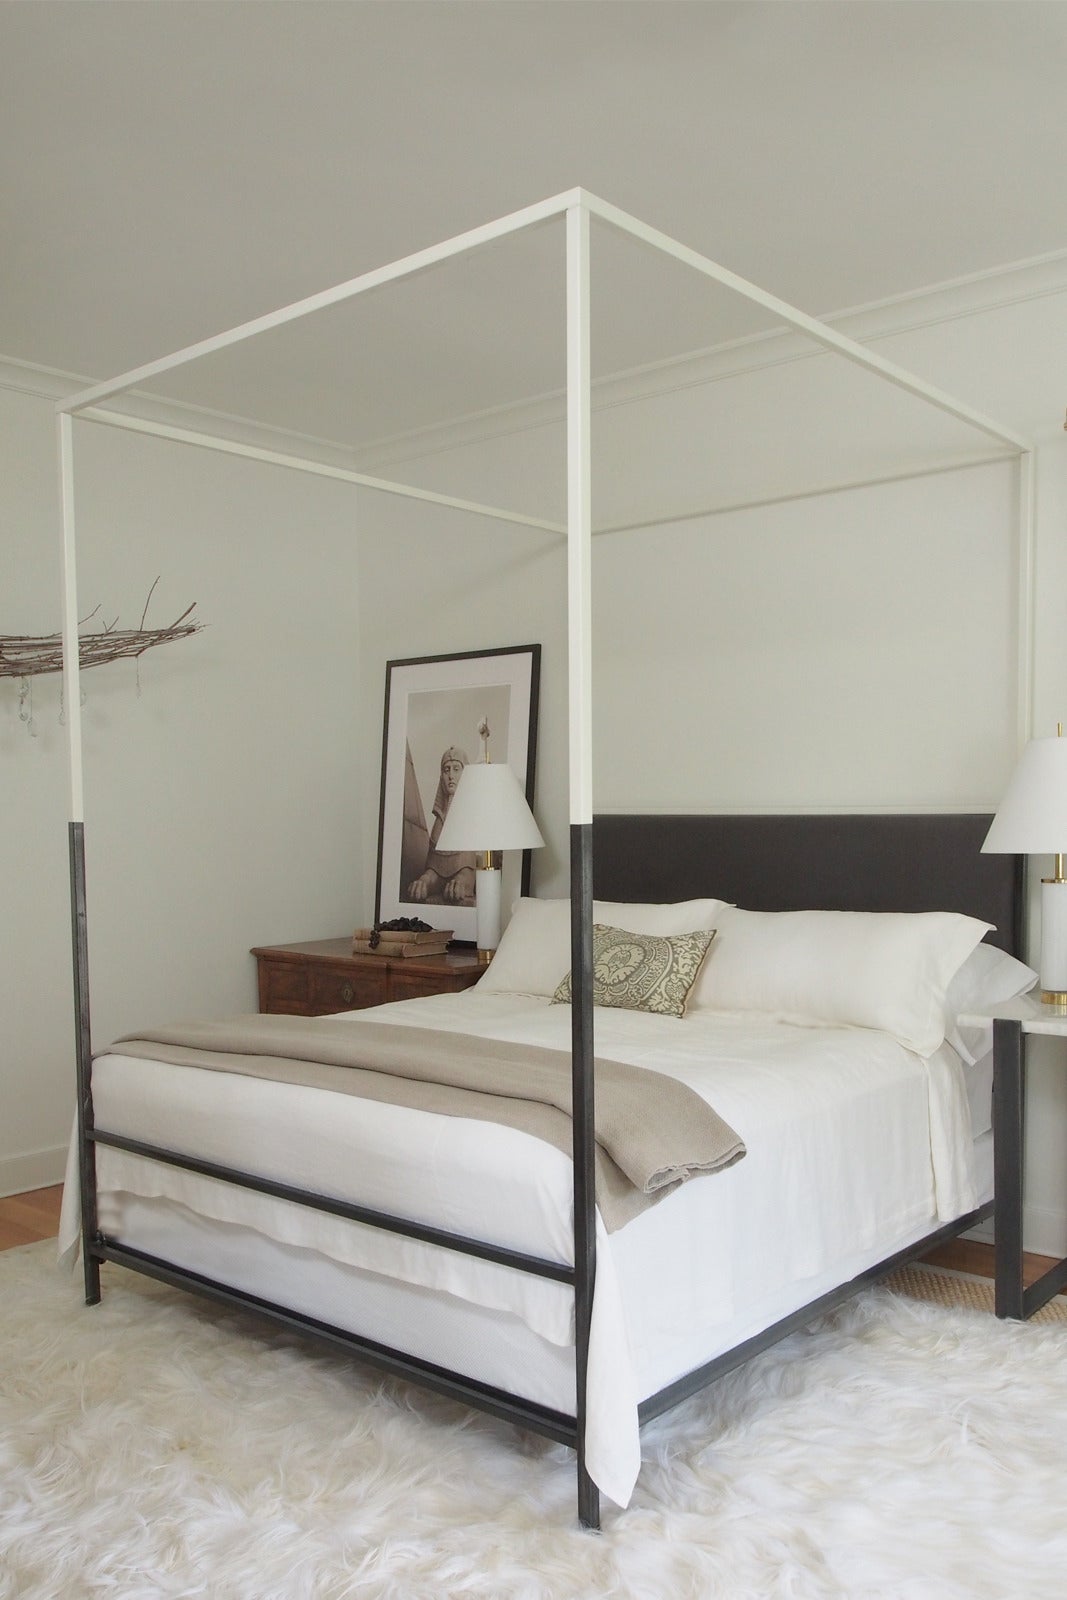 This ultra-sleek and streamlined two-tone iron canopy bed with upholstered headboard from the custom Tara Shaw Maison collection has been featured in several shelter magazines, including Veranda and Architectural Digest. Handcrafted in New Orleans.